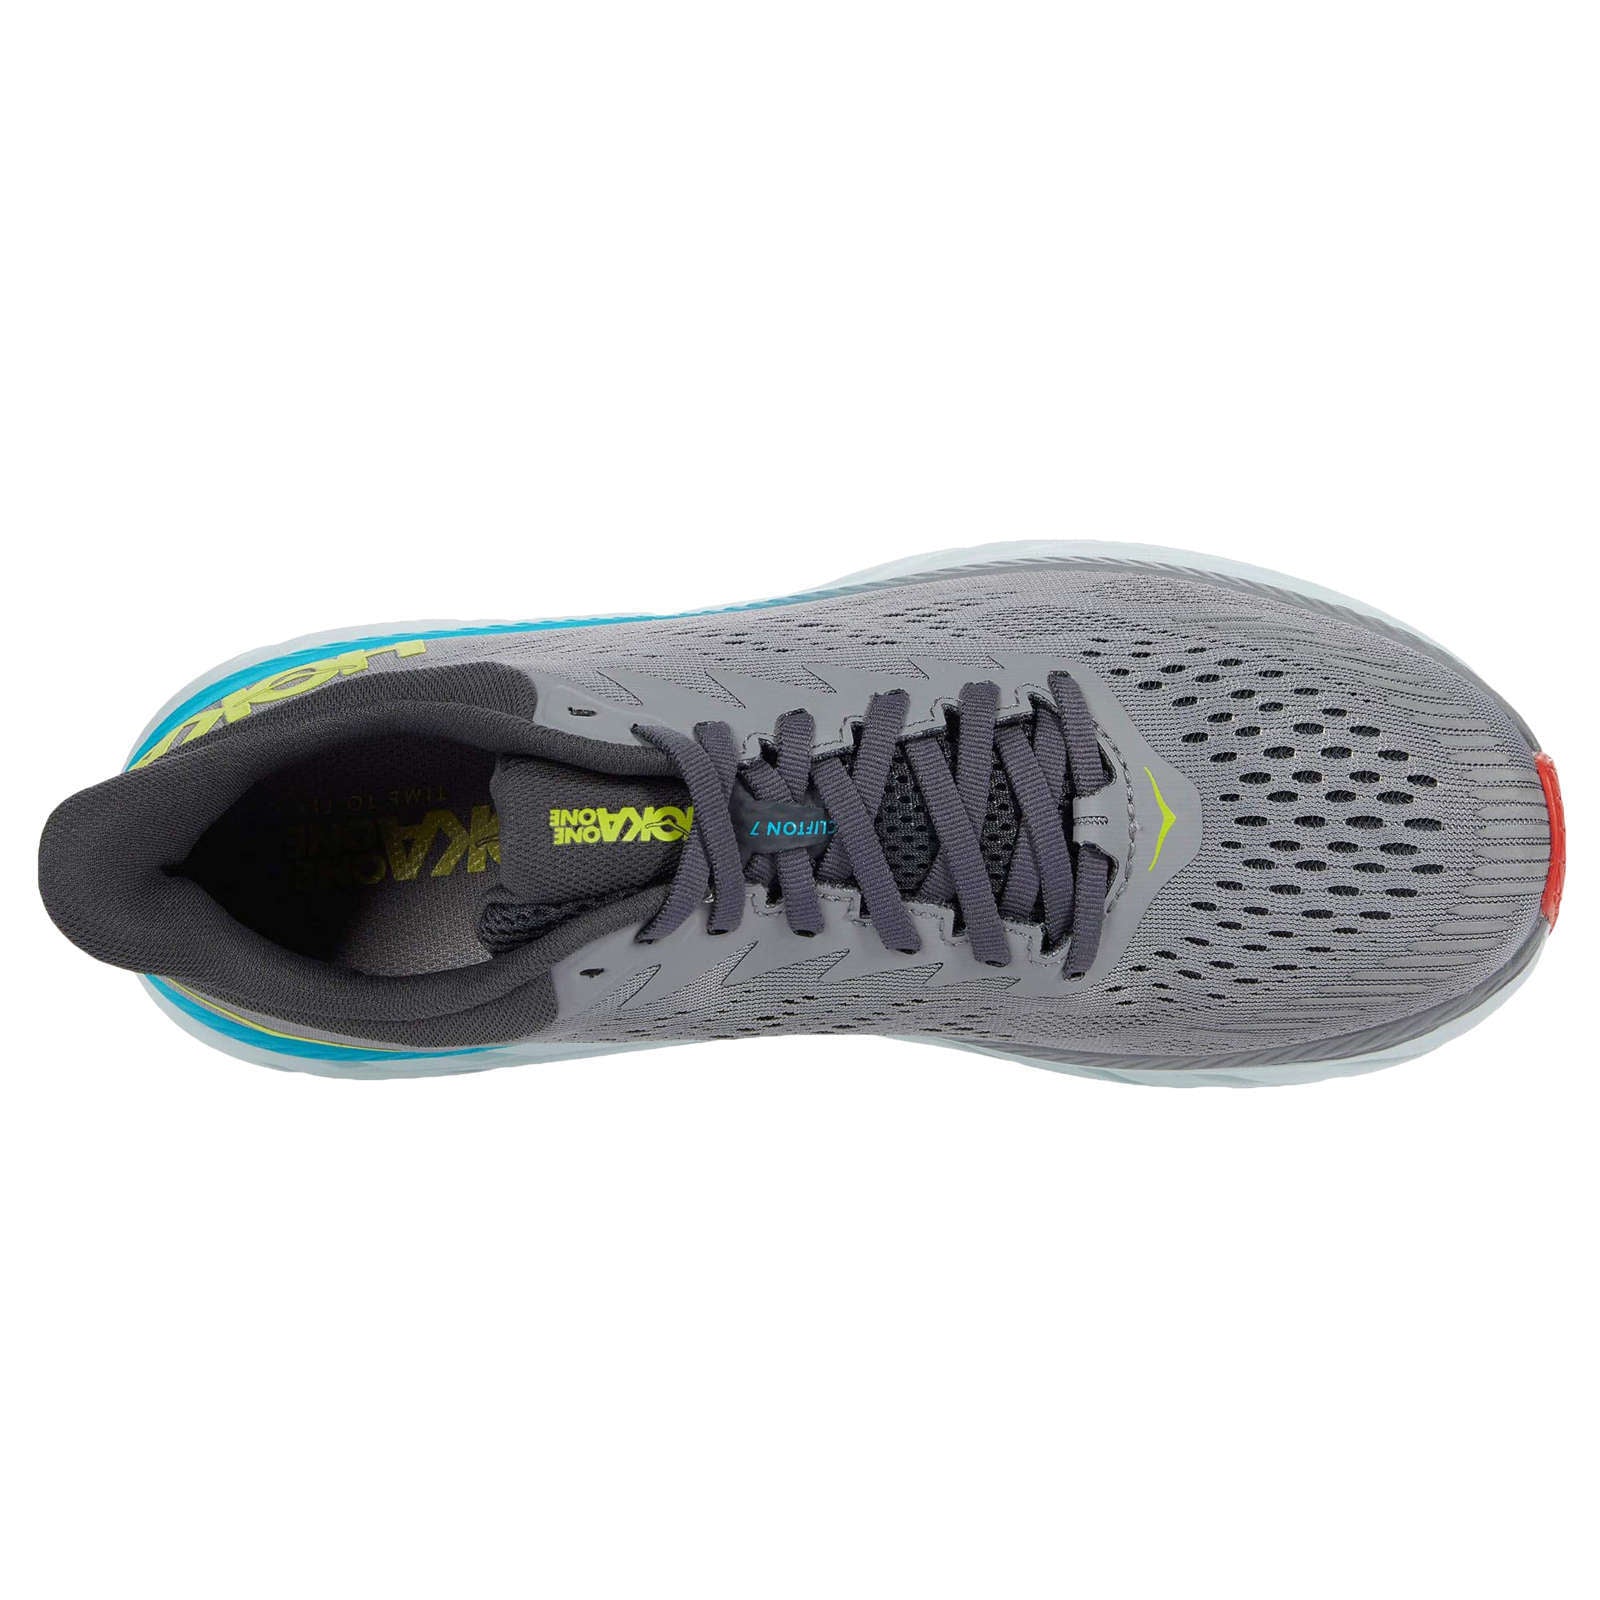 Hoka One One Clifton 7 Mesh Men's Low-Top Road Running Trainers#color_wild dove dark shadow